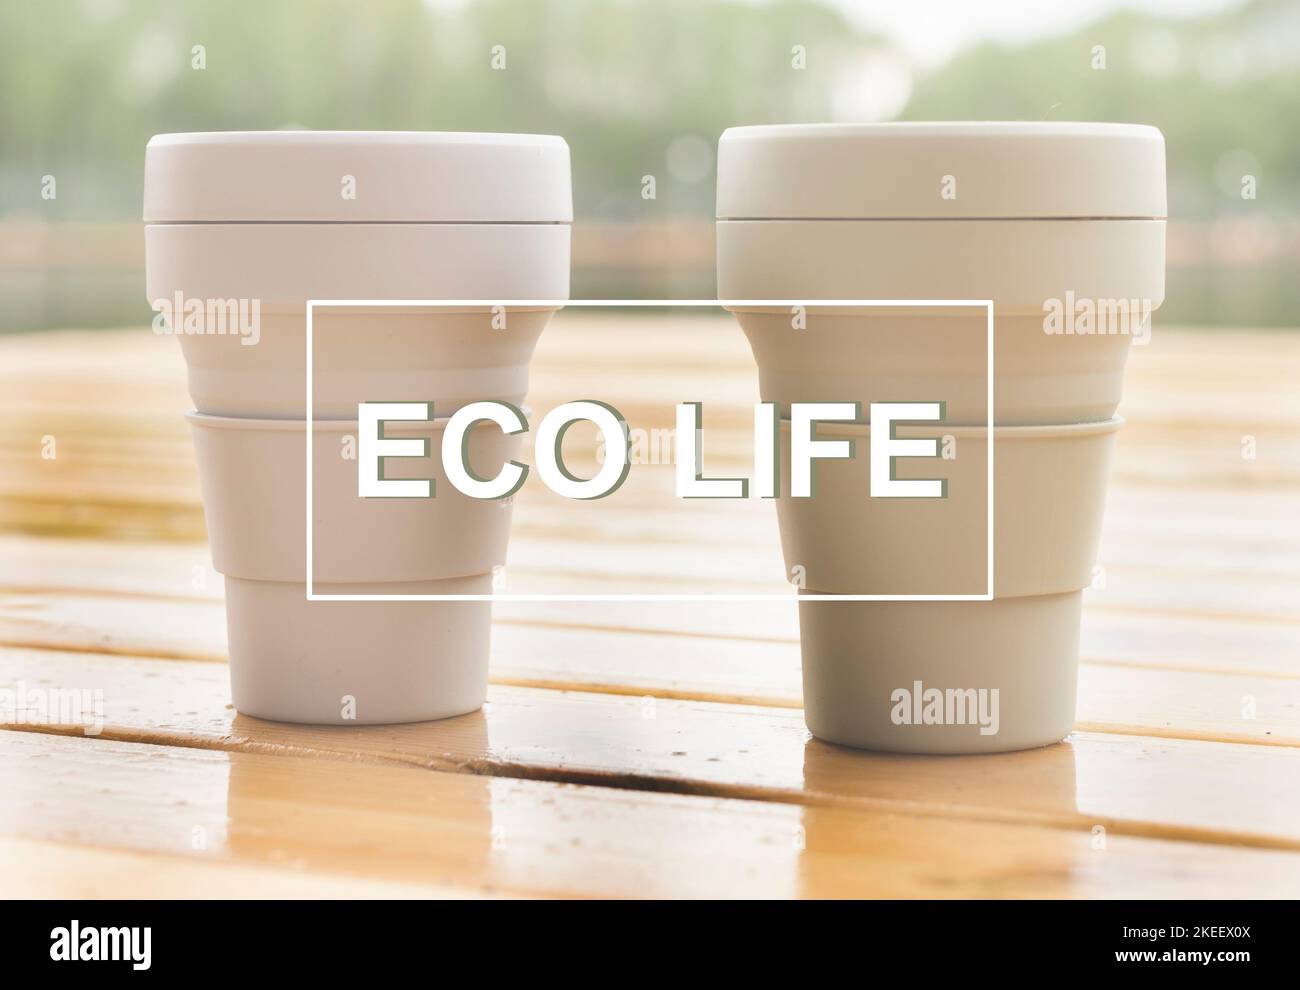 Eco life, sustainable and eco-friendly lifestyle concept. Stock Photo